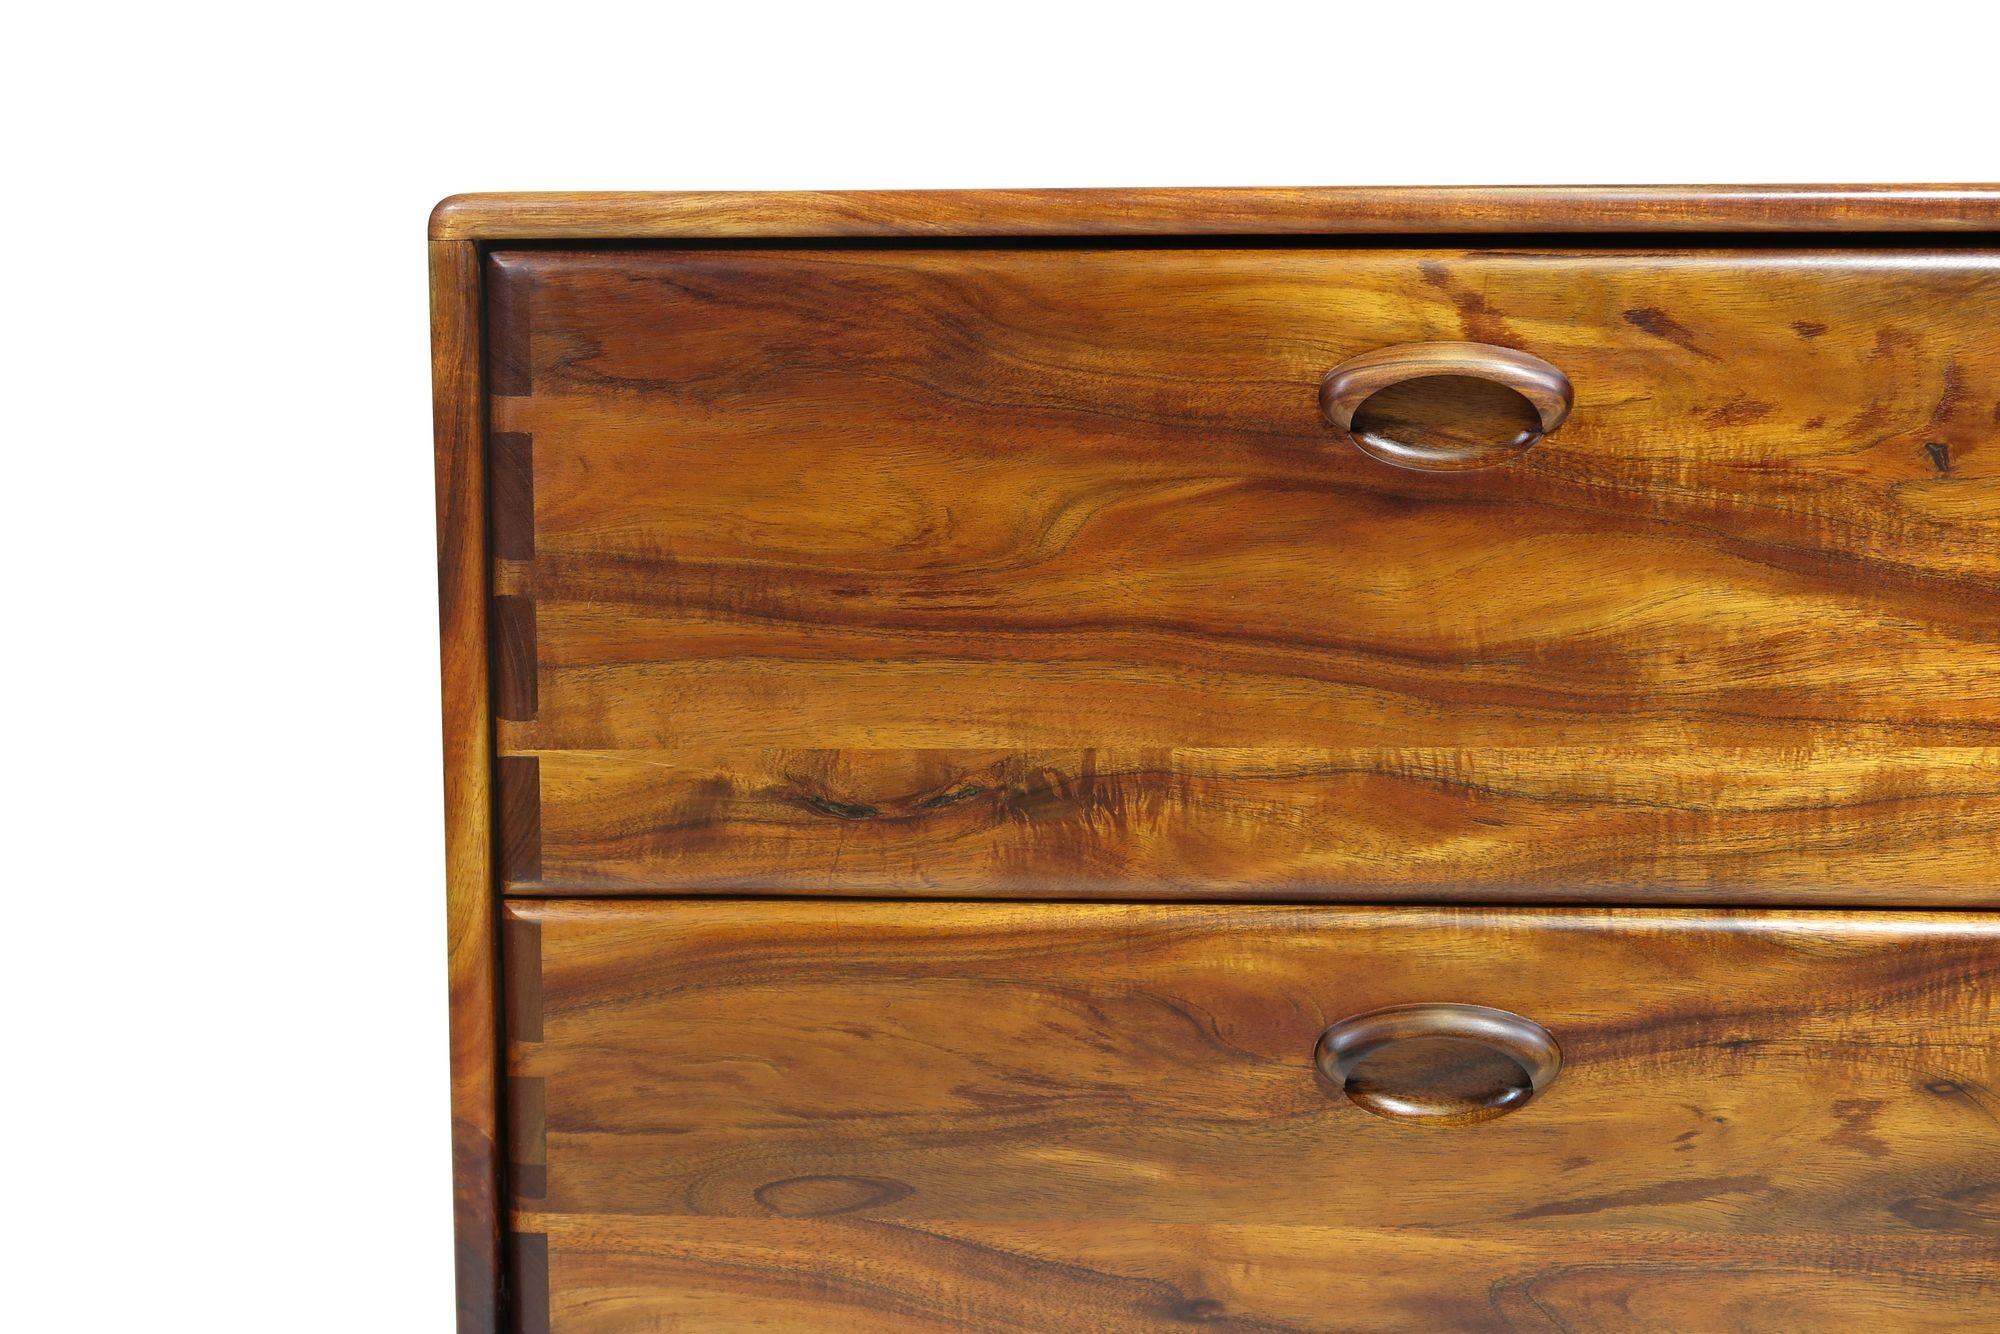 California studio craft filing cabinet designed by Jim Sweeney, Berkeley, circa 1983. The cabinet is handcrafted of solid Koa wood, and features two filing drawers with boldly exposed joinery on the cabinet and drawers. The cabinets have been